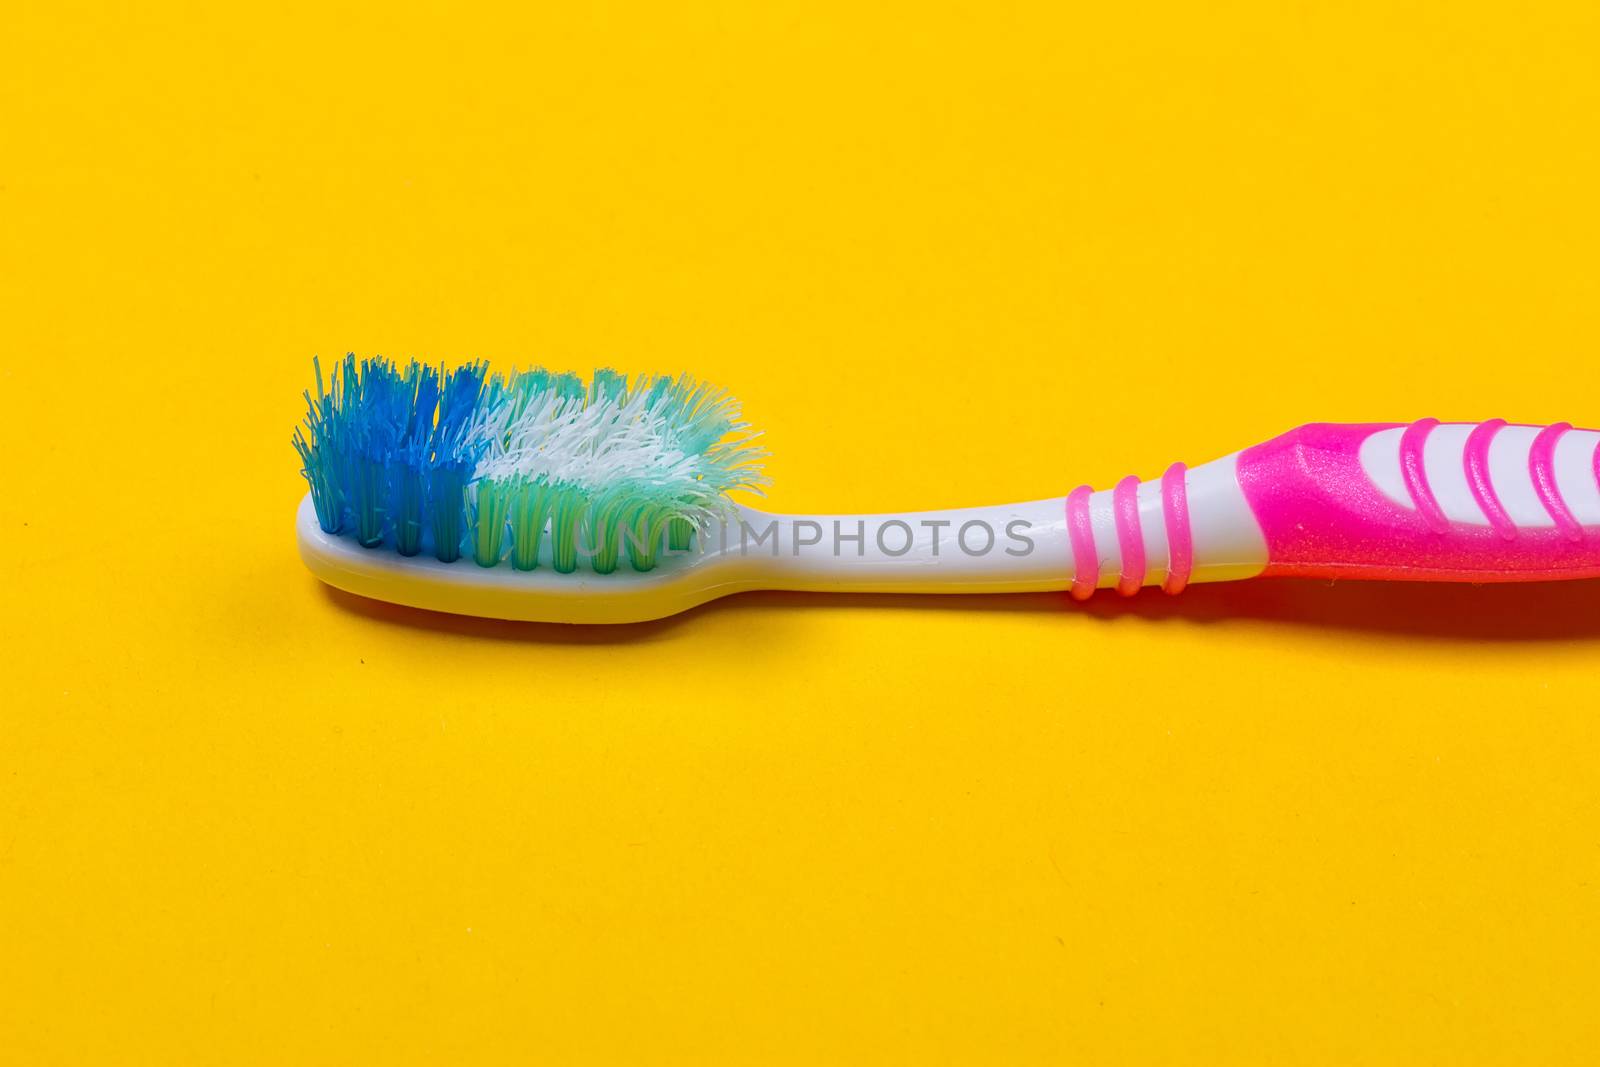 Toothbrushes on yellow background by victosha